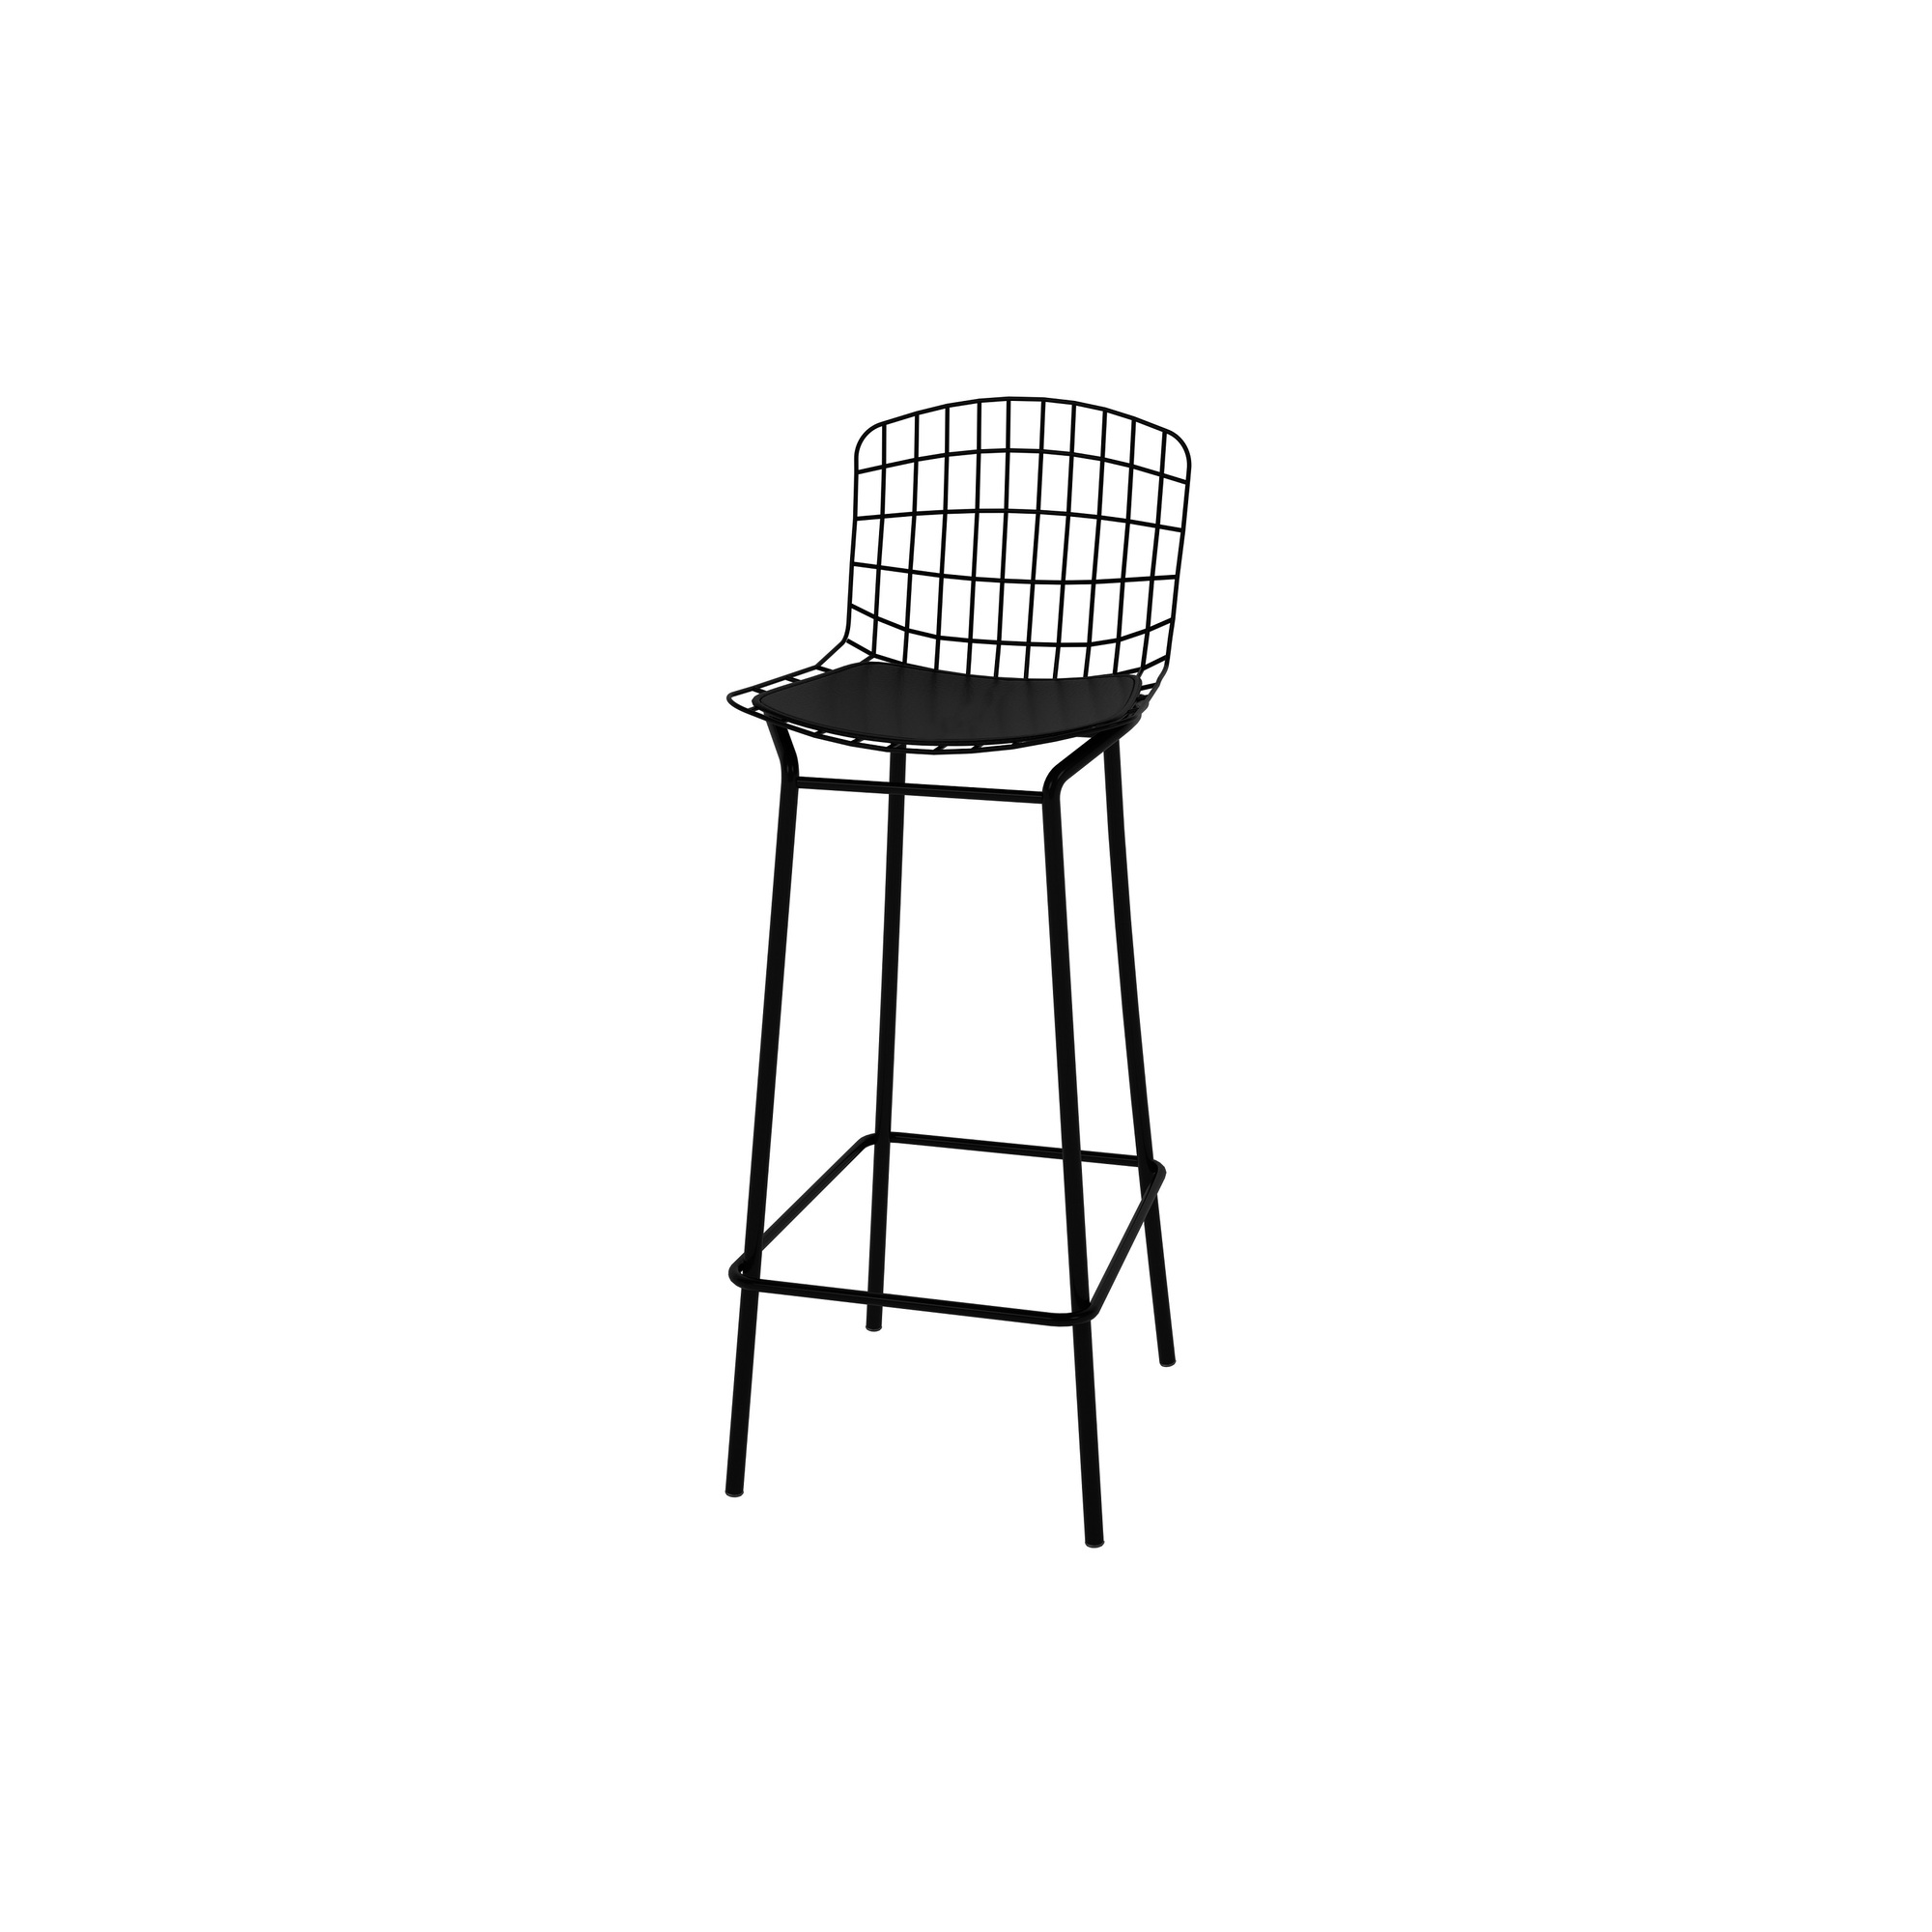 Manhattan Comfort, Madeline 41.73Inch Stool with Seat Cushion in Black, Primary Color Black, Included (qty.) 1 Model 198AMC